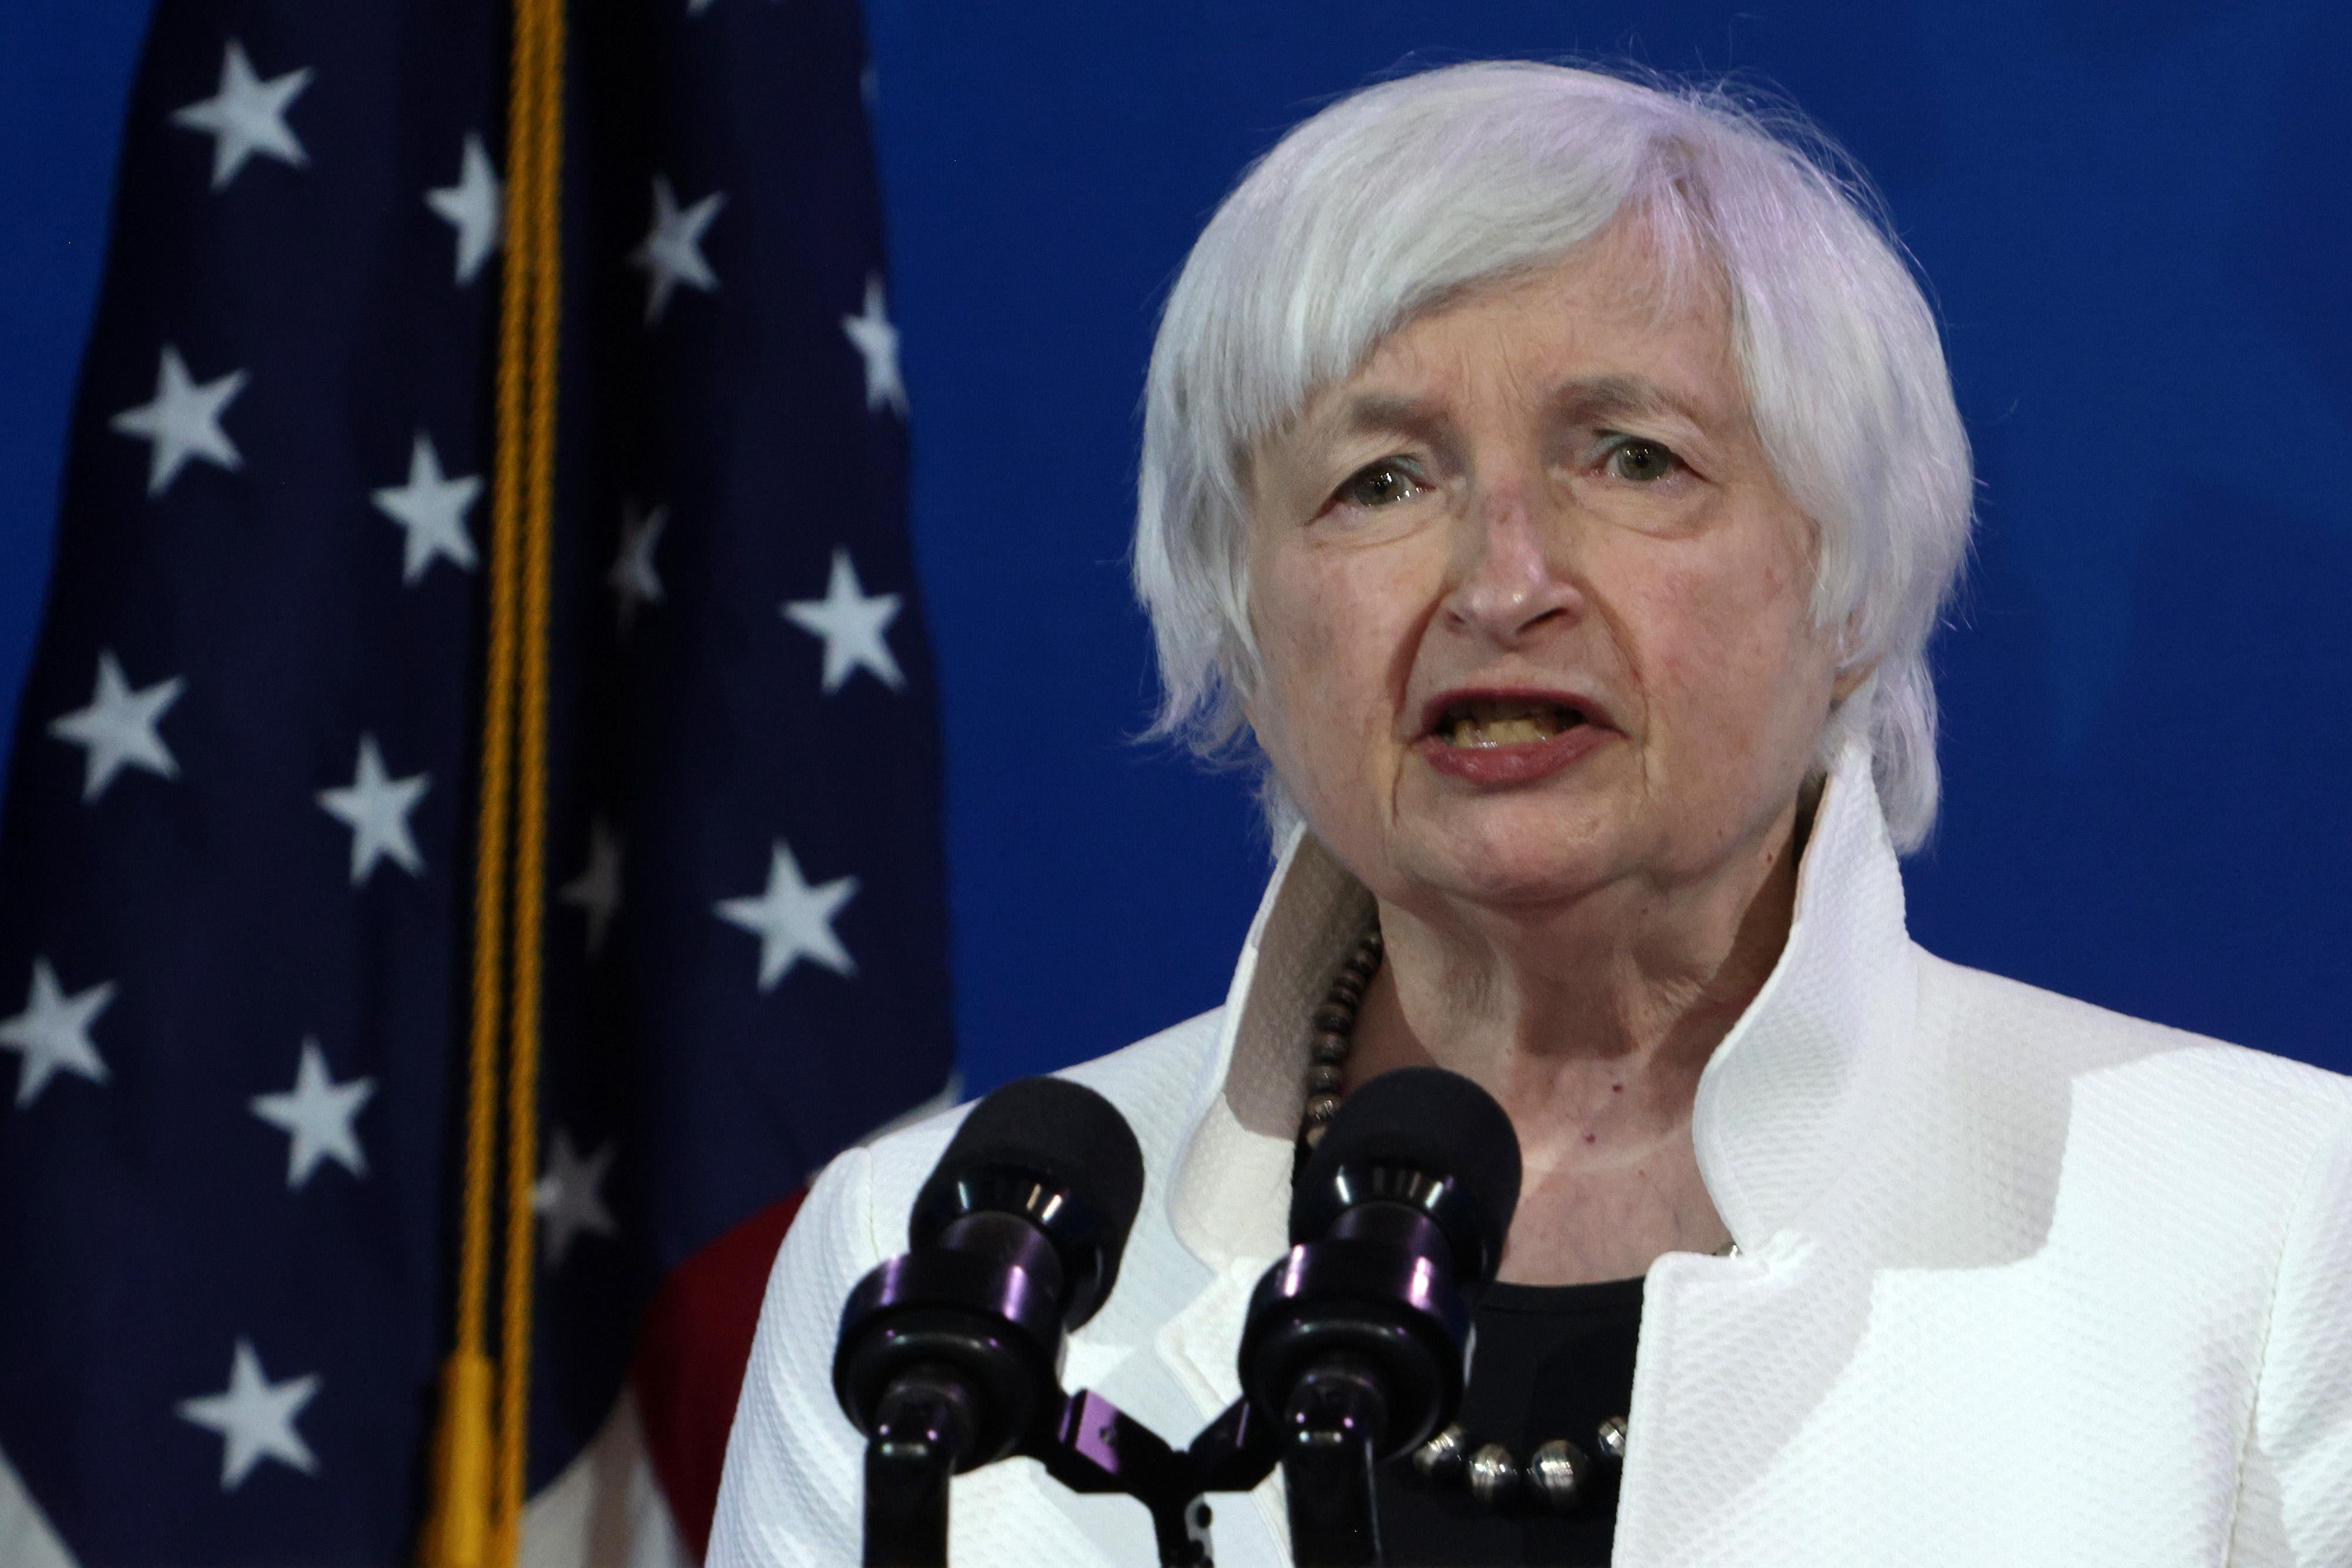 Janet Yellen speaks into a pair of microphones while standing in front of a U.S. flag.